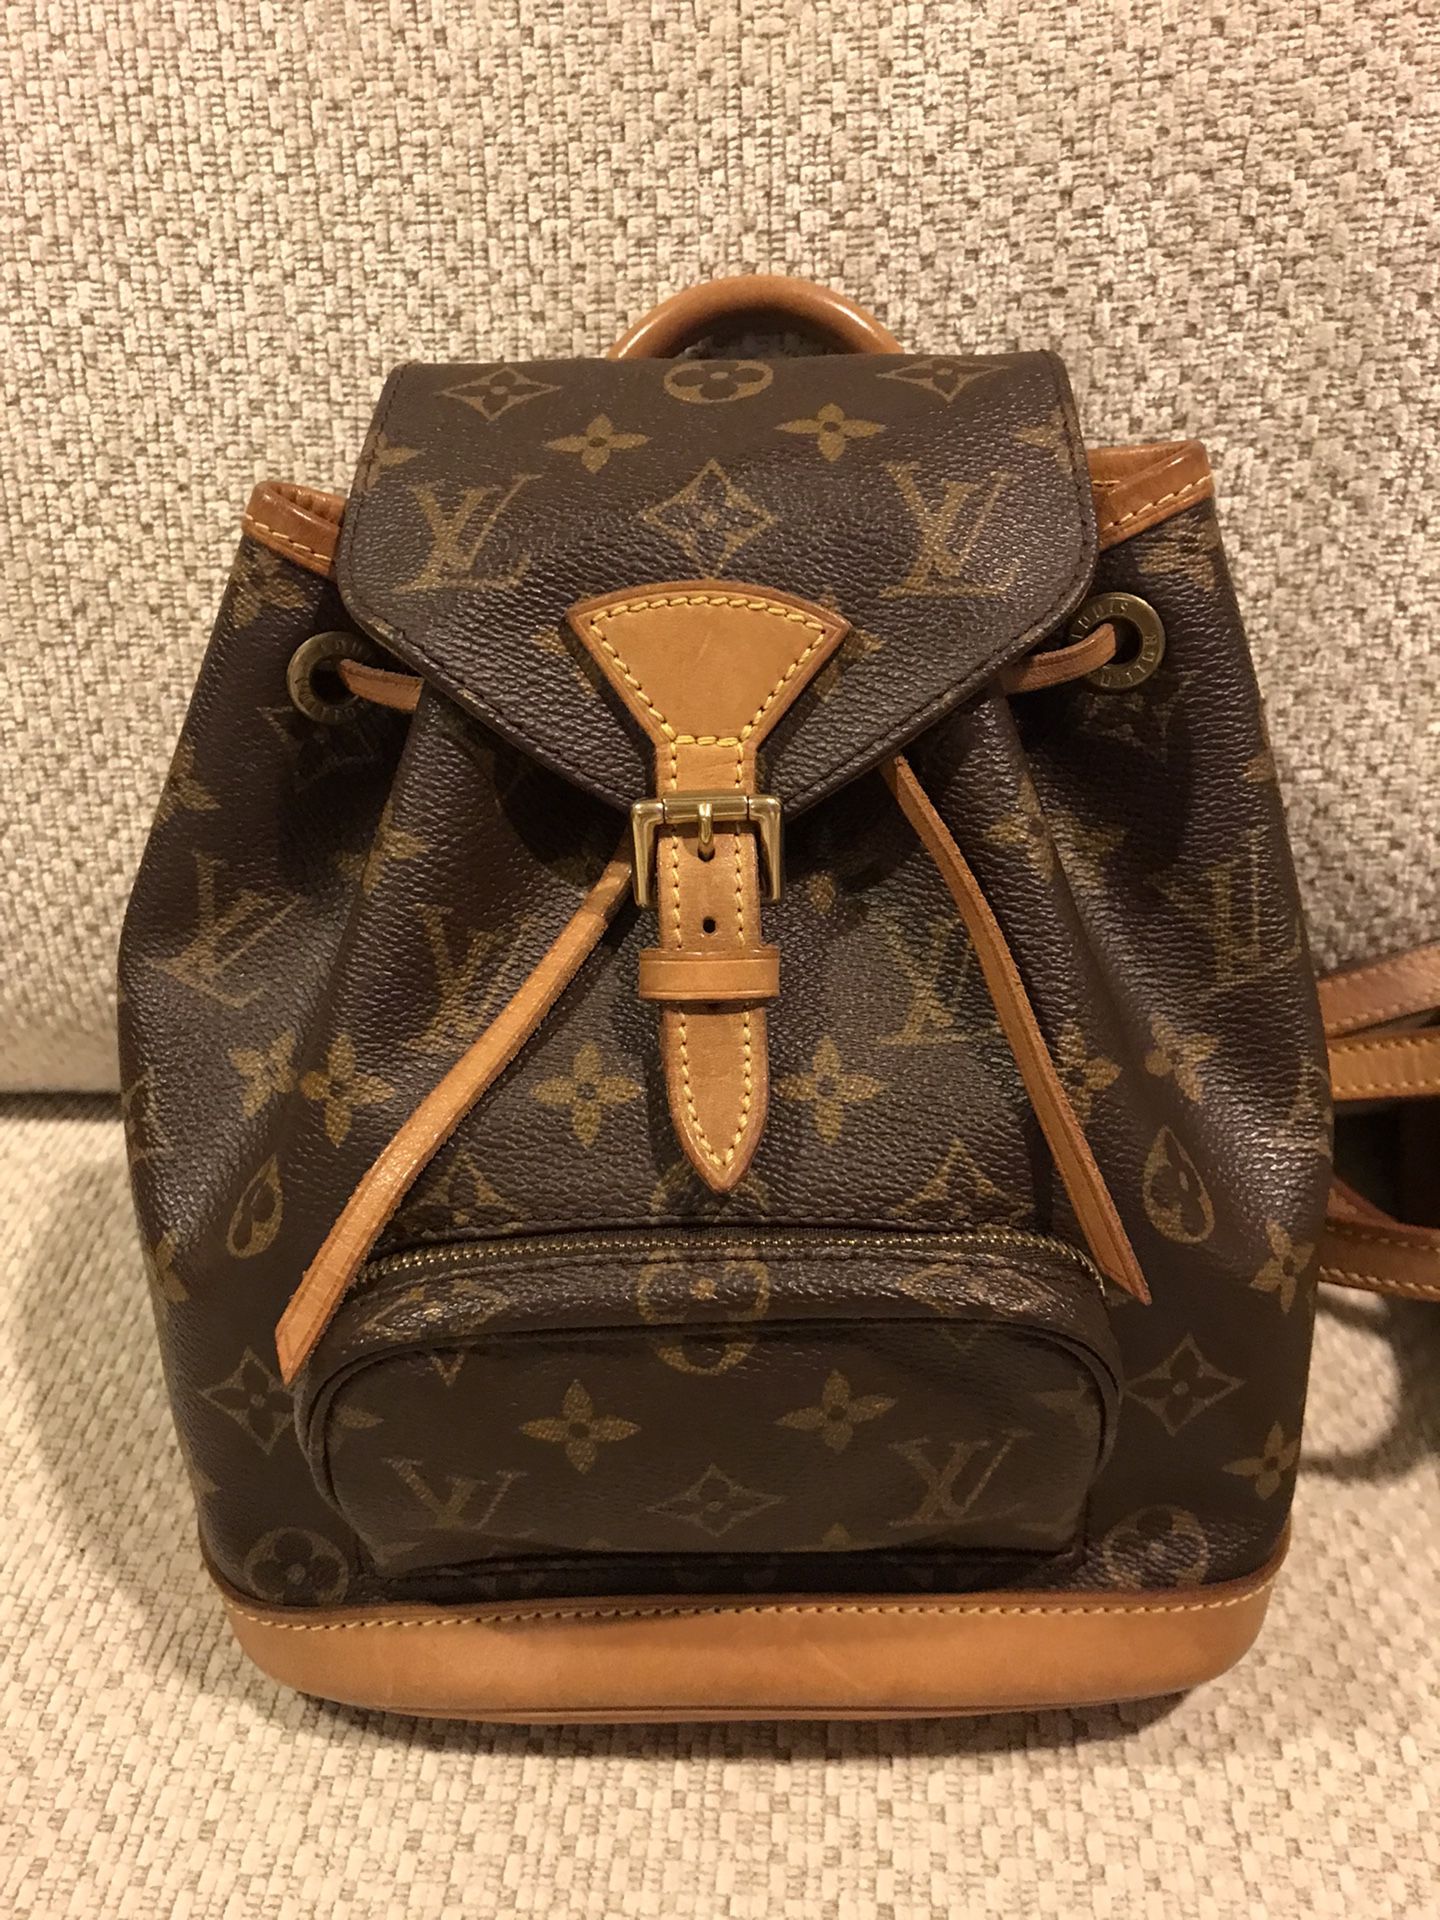 Vintage Louis Vuitton Montsouris Pm Backpack for Sale in Chicago